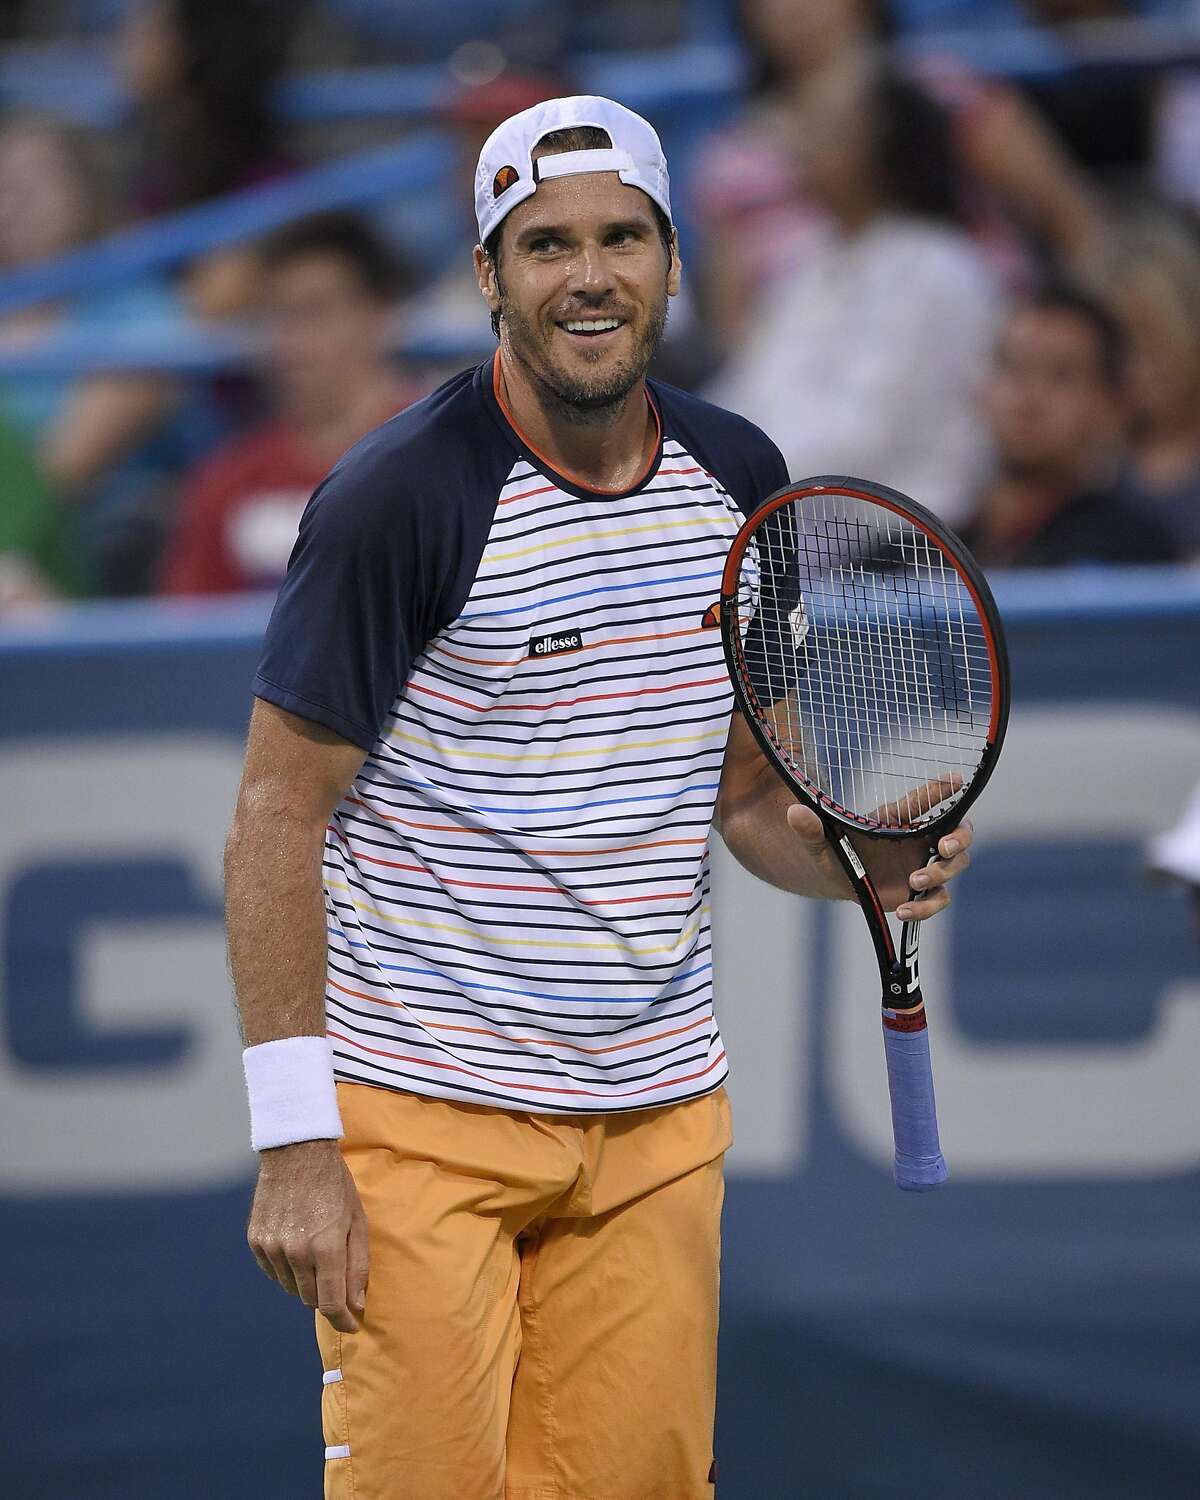 FILE - In this Aug. 3, 2015, file photo, Tommy Haas, of Germany, reacts during a match against Donald Young at the Citi Open tennis tournament in Washington. Tommy Haas was hired Friday, June 3, 2016, as tournament director of the BNP Paribas Open, replacing Raymond Moore, who quit in March after making controversial comments about female players. Haas' hiring must be approved by the ATP and WTA tours, which play at the combined $7 million, two-week event every March in the Southern California desert. (AP Photo/Nick Wass, File)